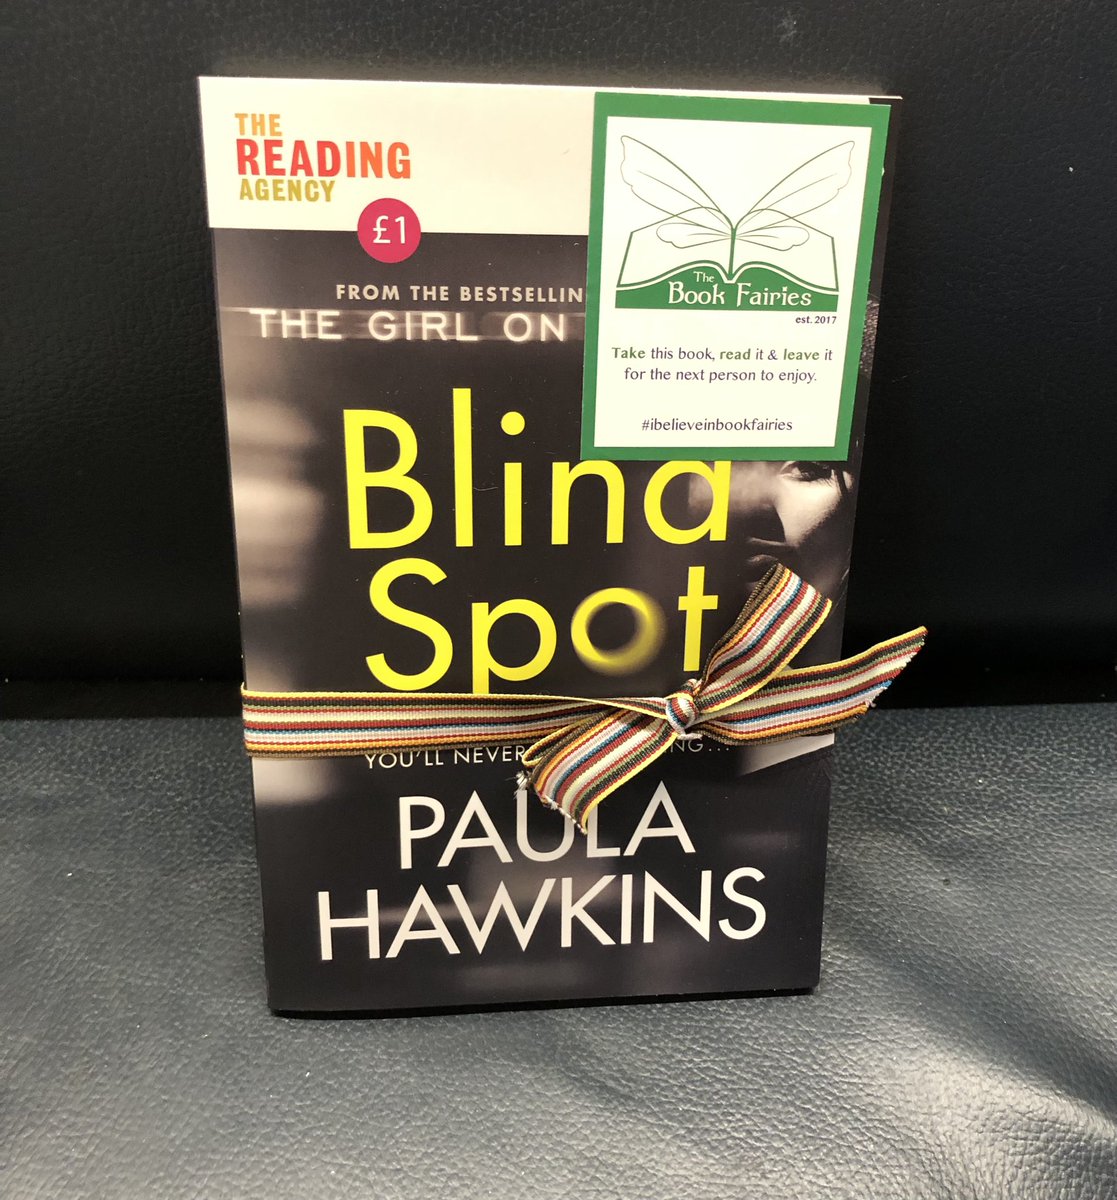 #ibelieveinbookfaries @the_bookfairies 

Blind Spot by #paulahawkins 

Left in @JohnLewisRetail cafe @centremk 
Edie is alone for the first time in years, living in the remote house that she and Jake shared. She is grief-stricken and afraid - with good reason.